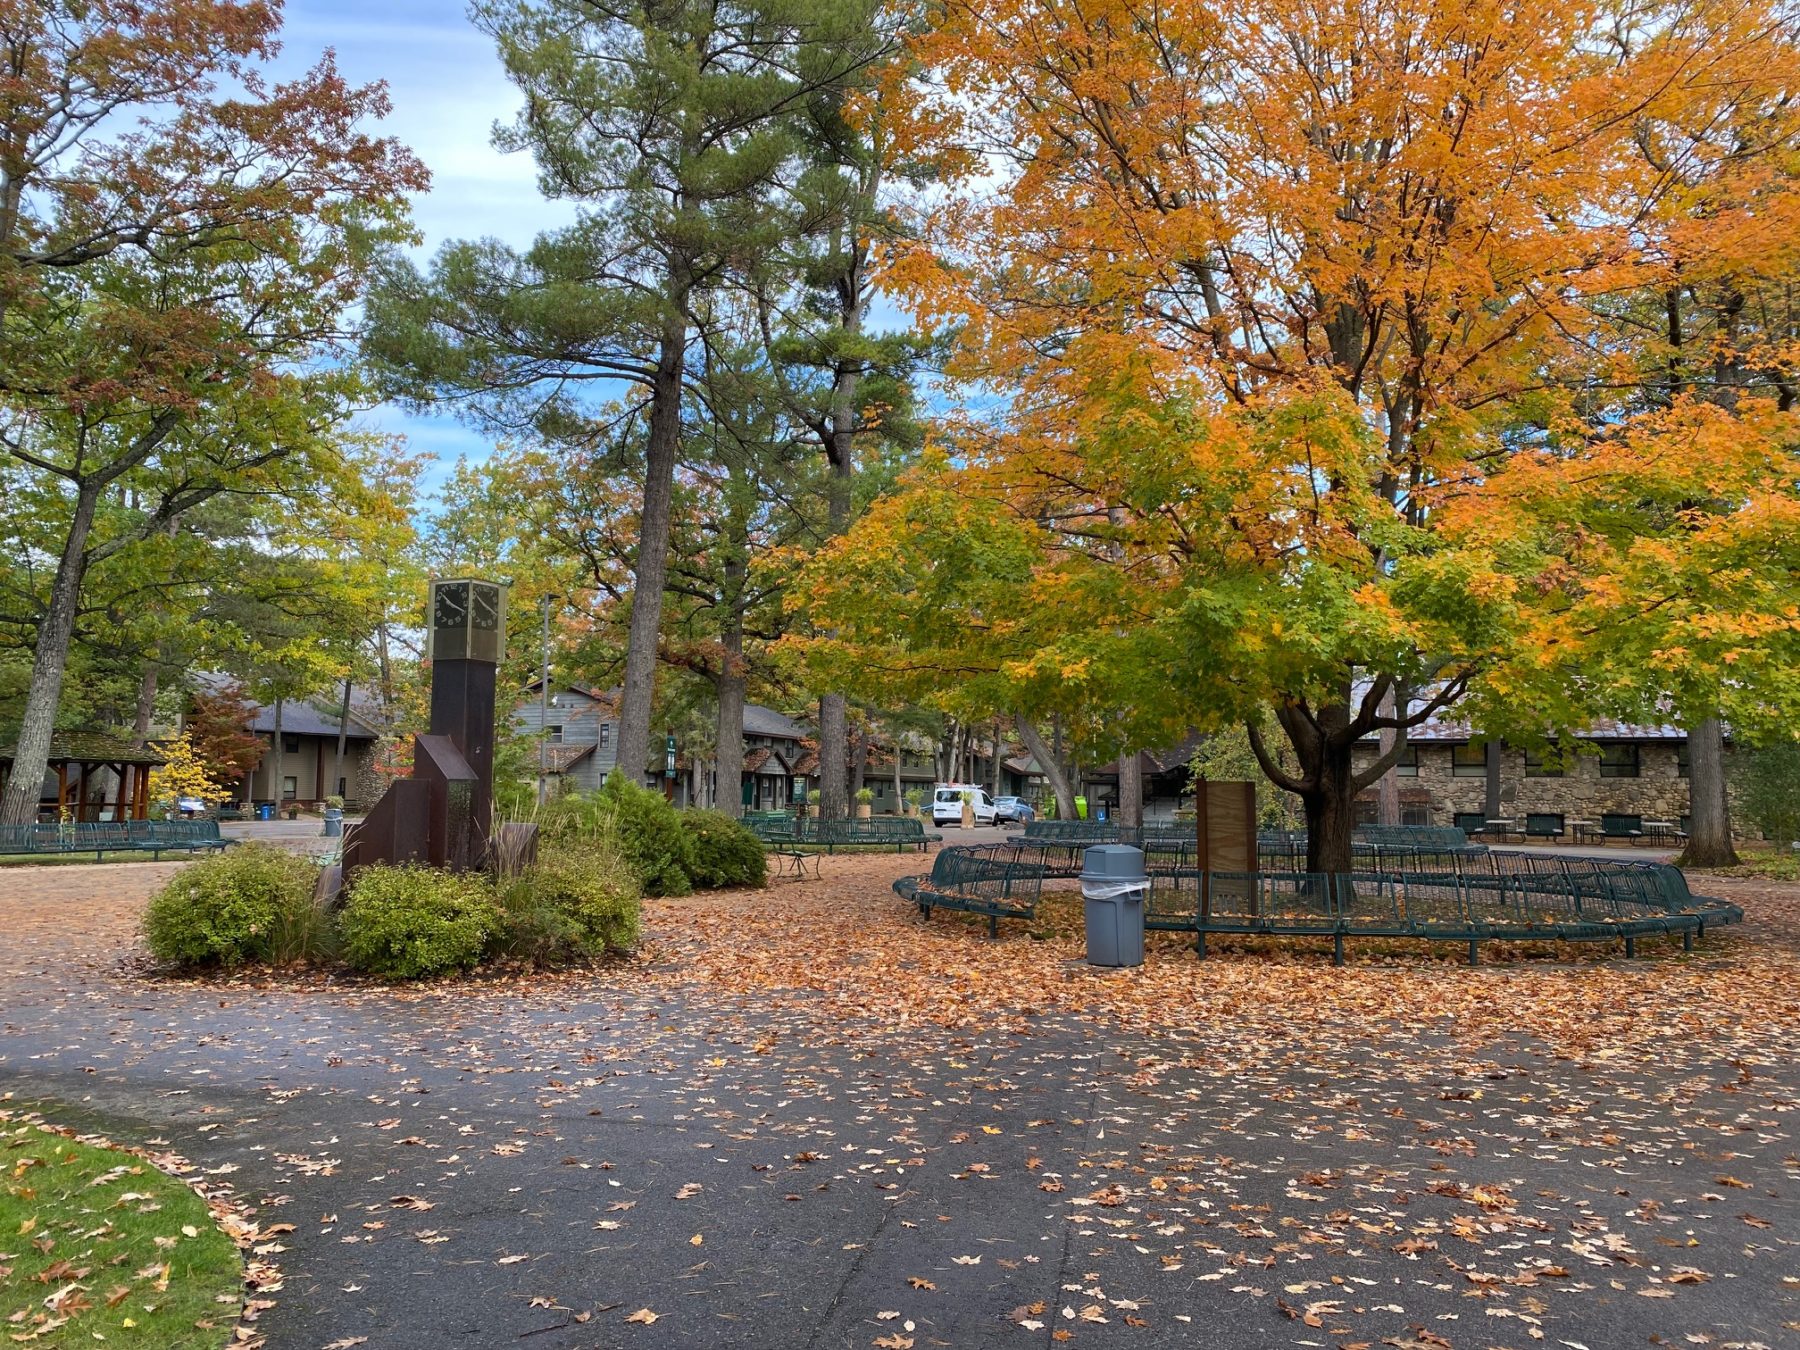 The Interlochen campus in fall: a large tree is bright yellow and green, and yellow leaves are on the ground surrounding it